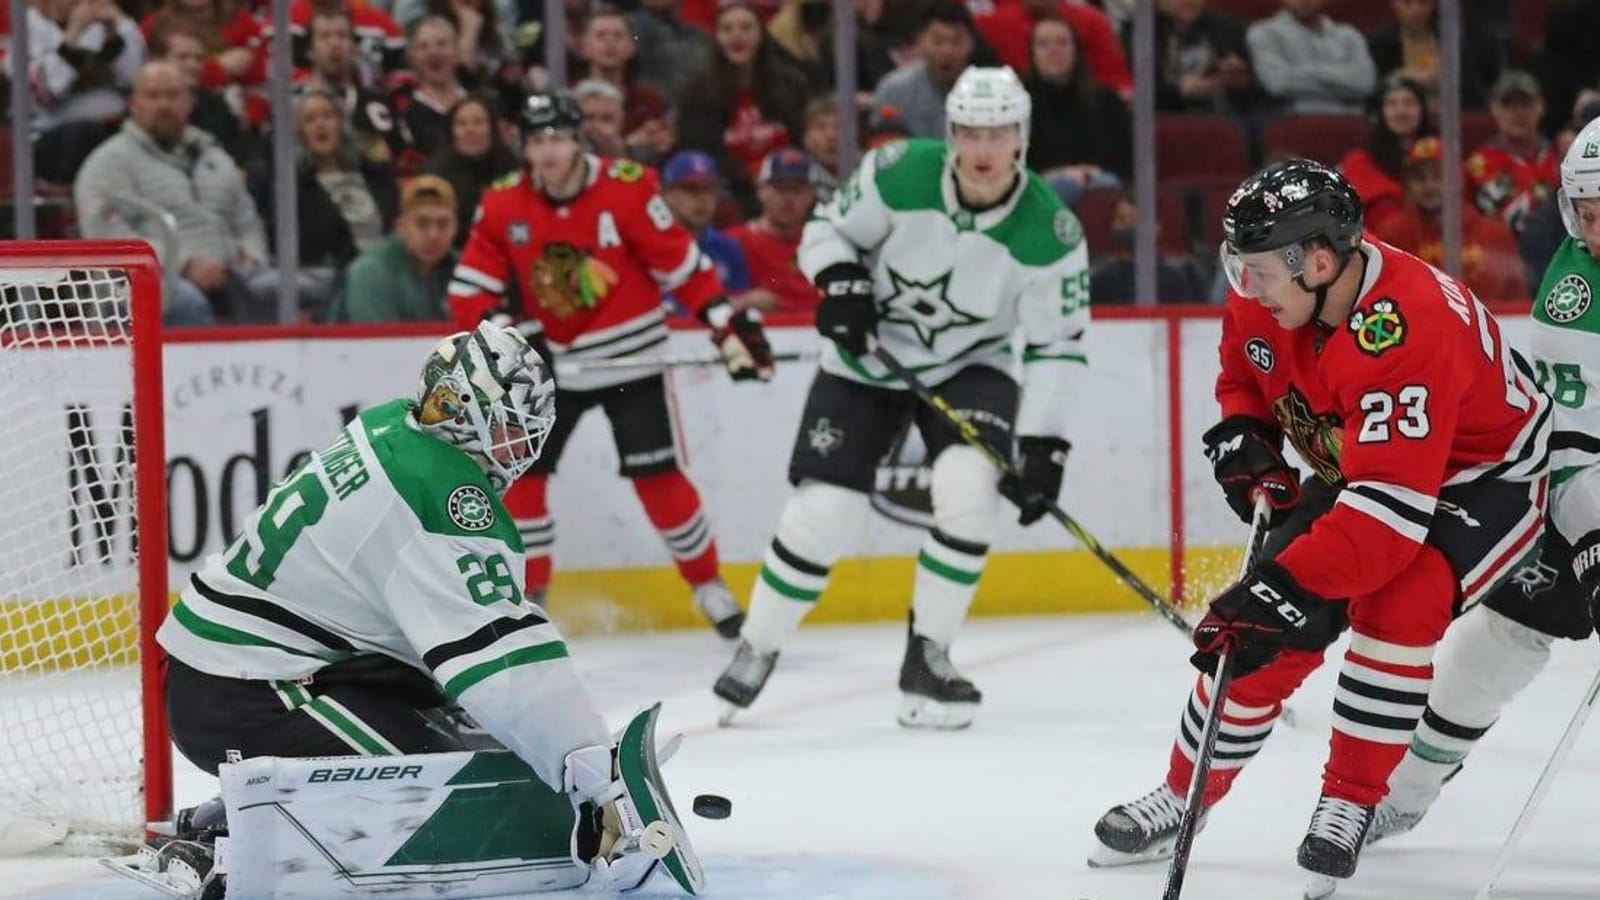 Stars welcome struggling Blackhawks looking for bounce-back win